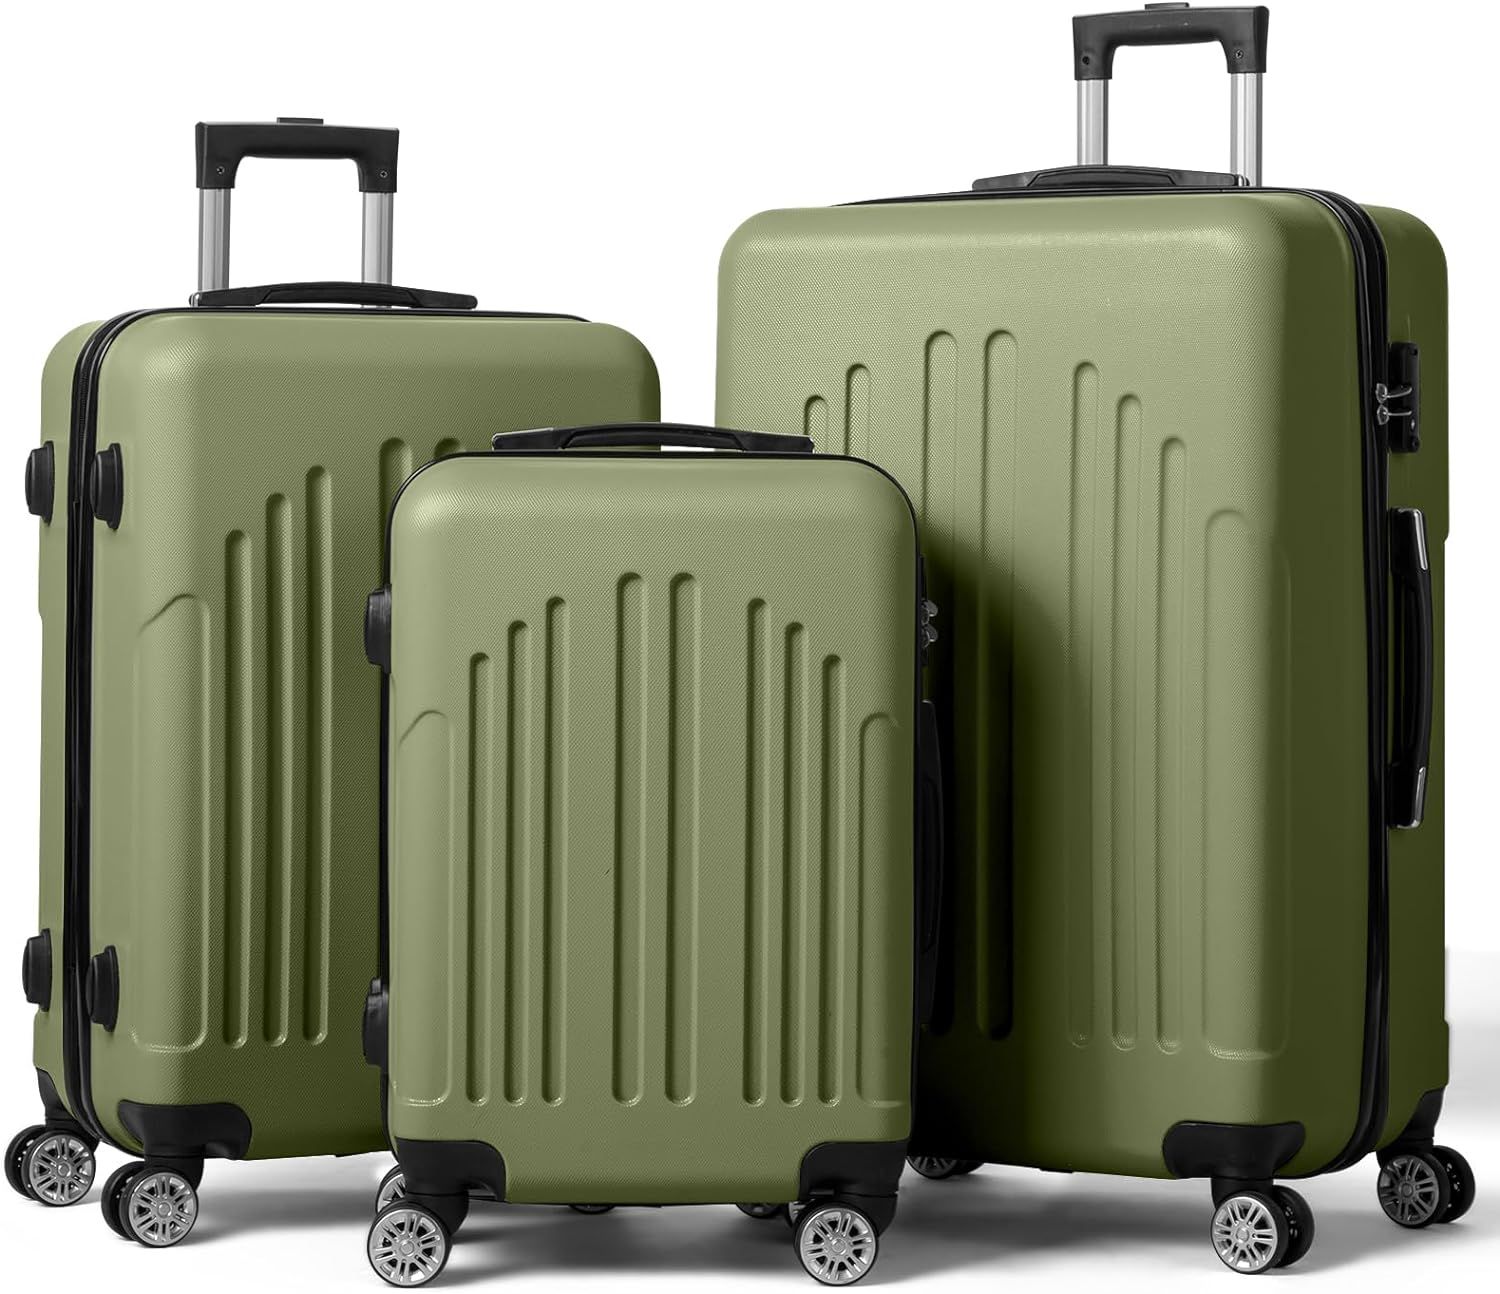 Karl home Luggage Set of 3 Hardside Suitcase Sets with TSA Lock 4 Spinner Wheels, ABS Lightweight... | Amazon (US)